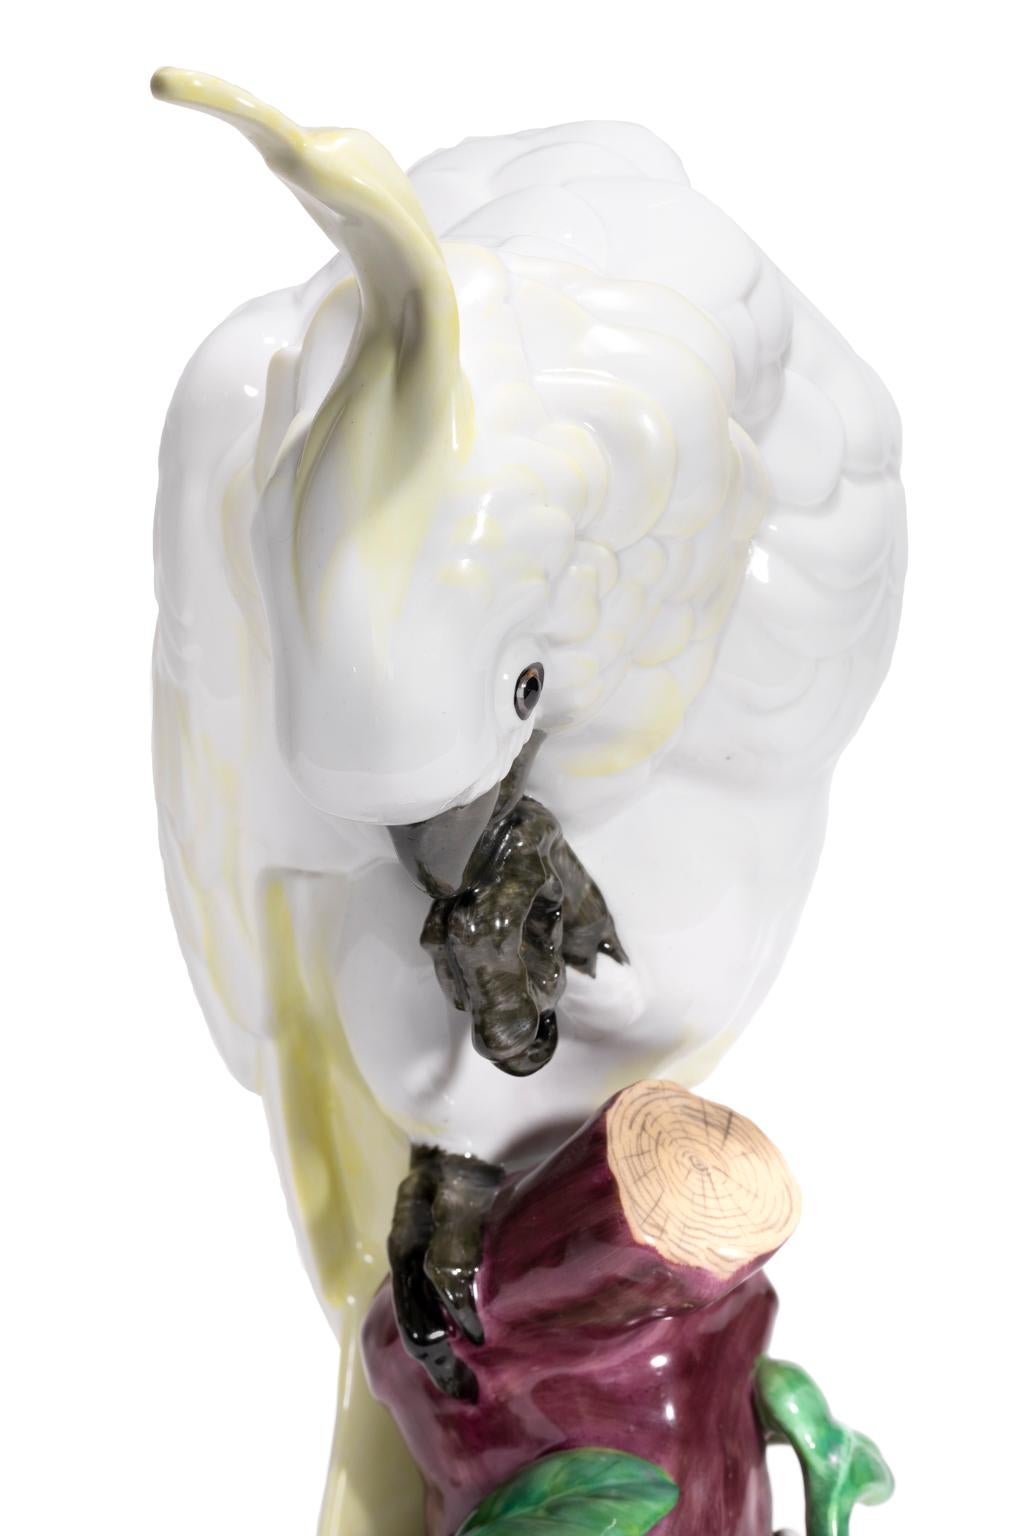 Hand-Carved Hutschenreuther-Selb Porcelain Figurine 